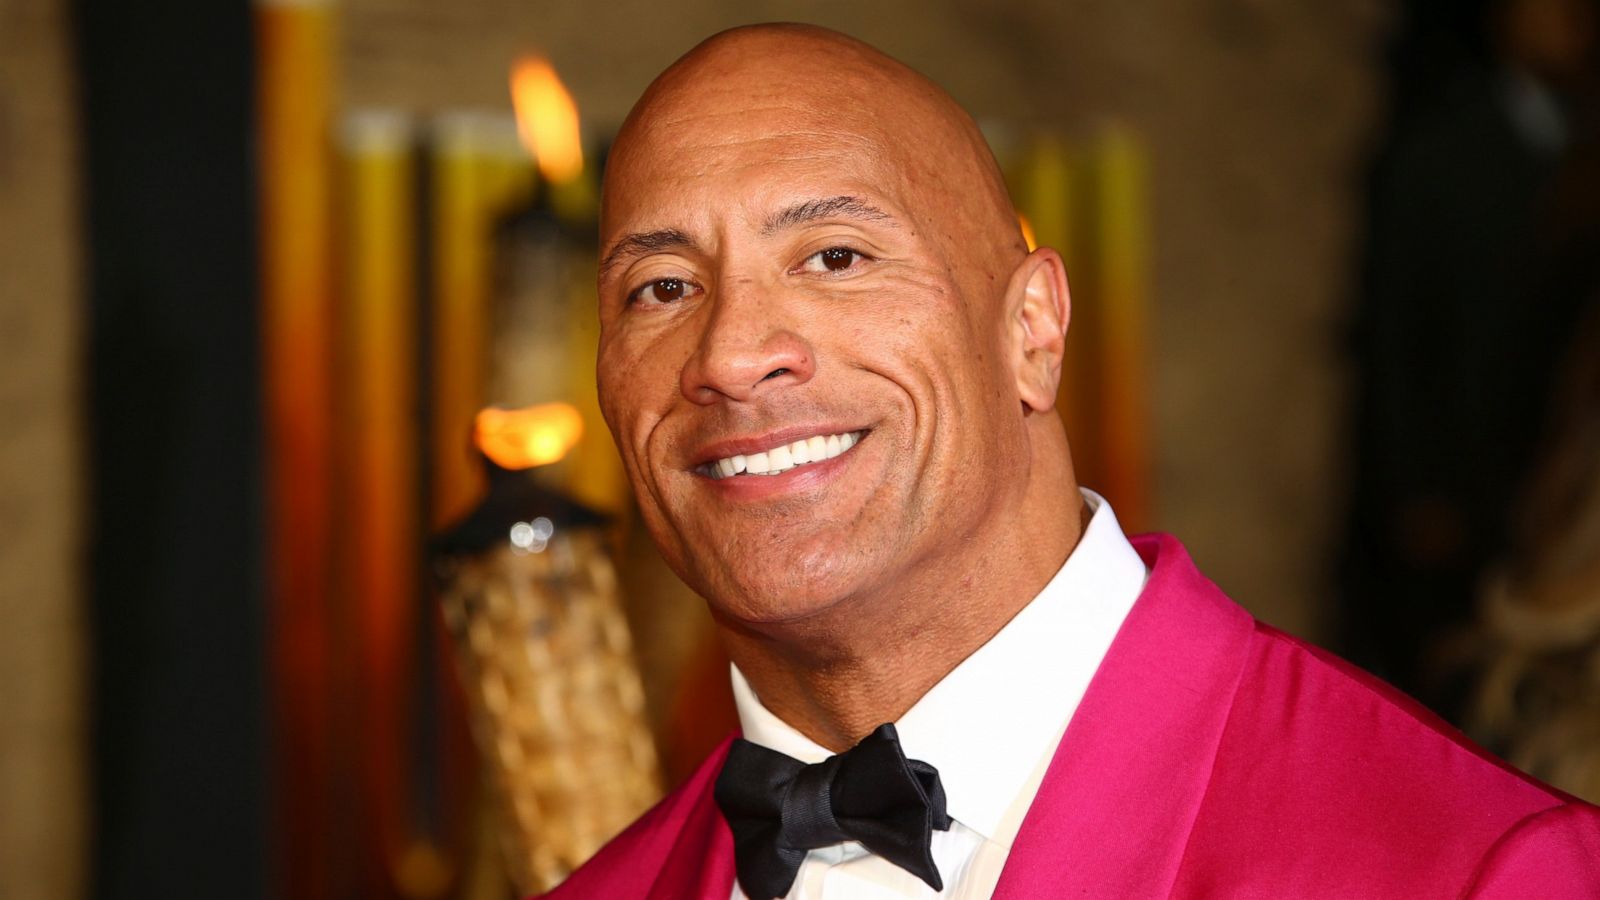 Dwayne “The Rock” Johnson to Appear at the Oscars, A&E WWE Programming Schedule for Tonight